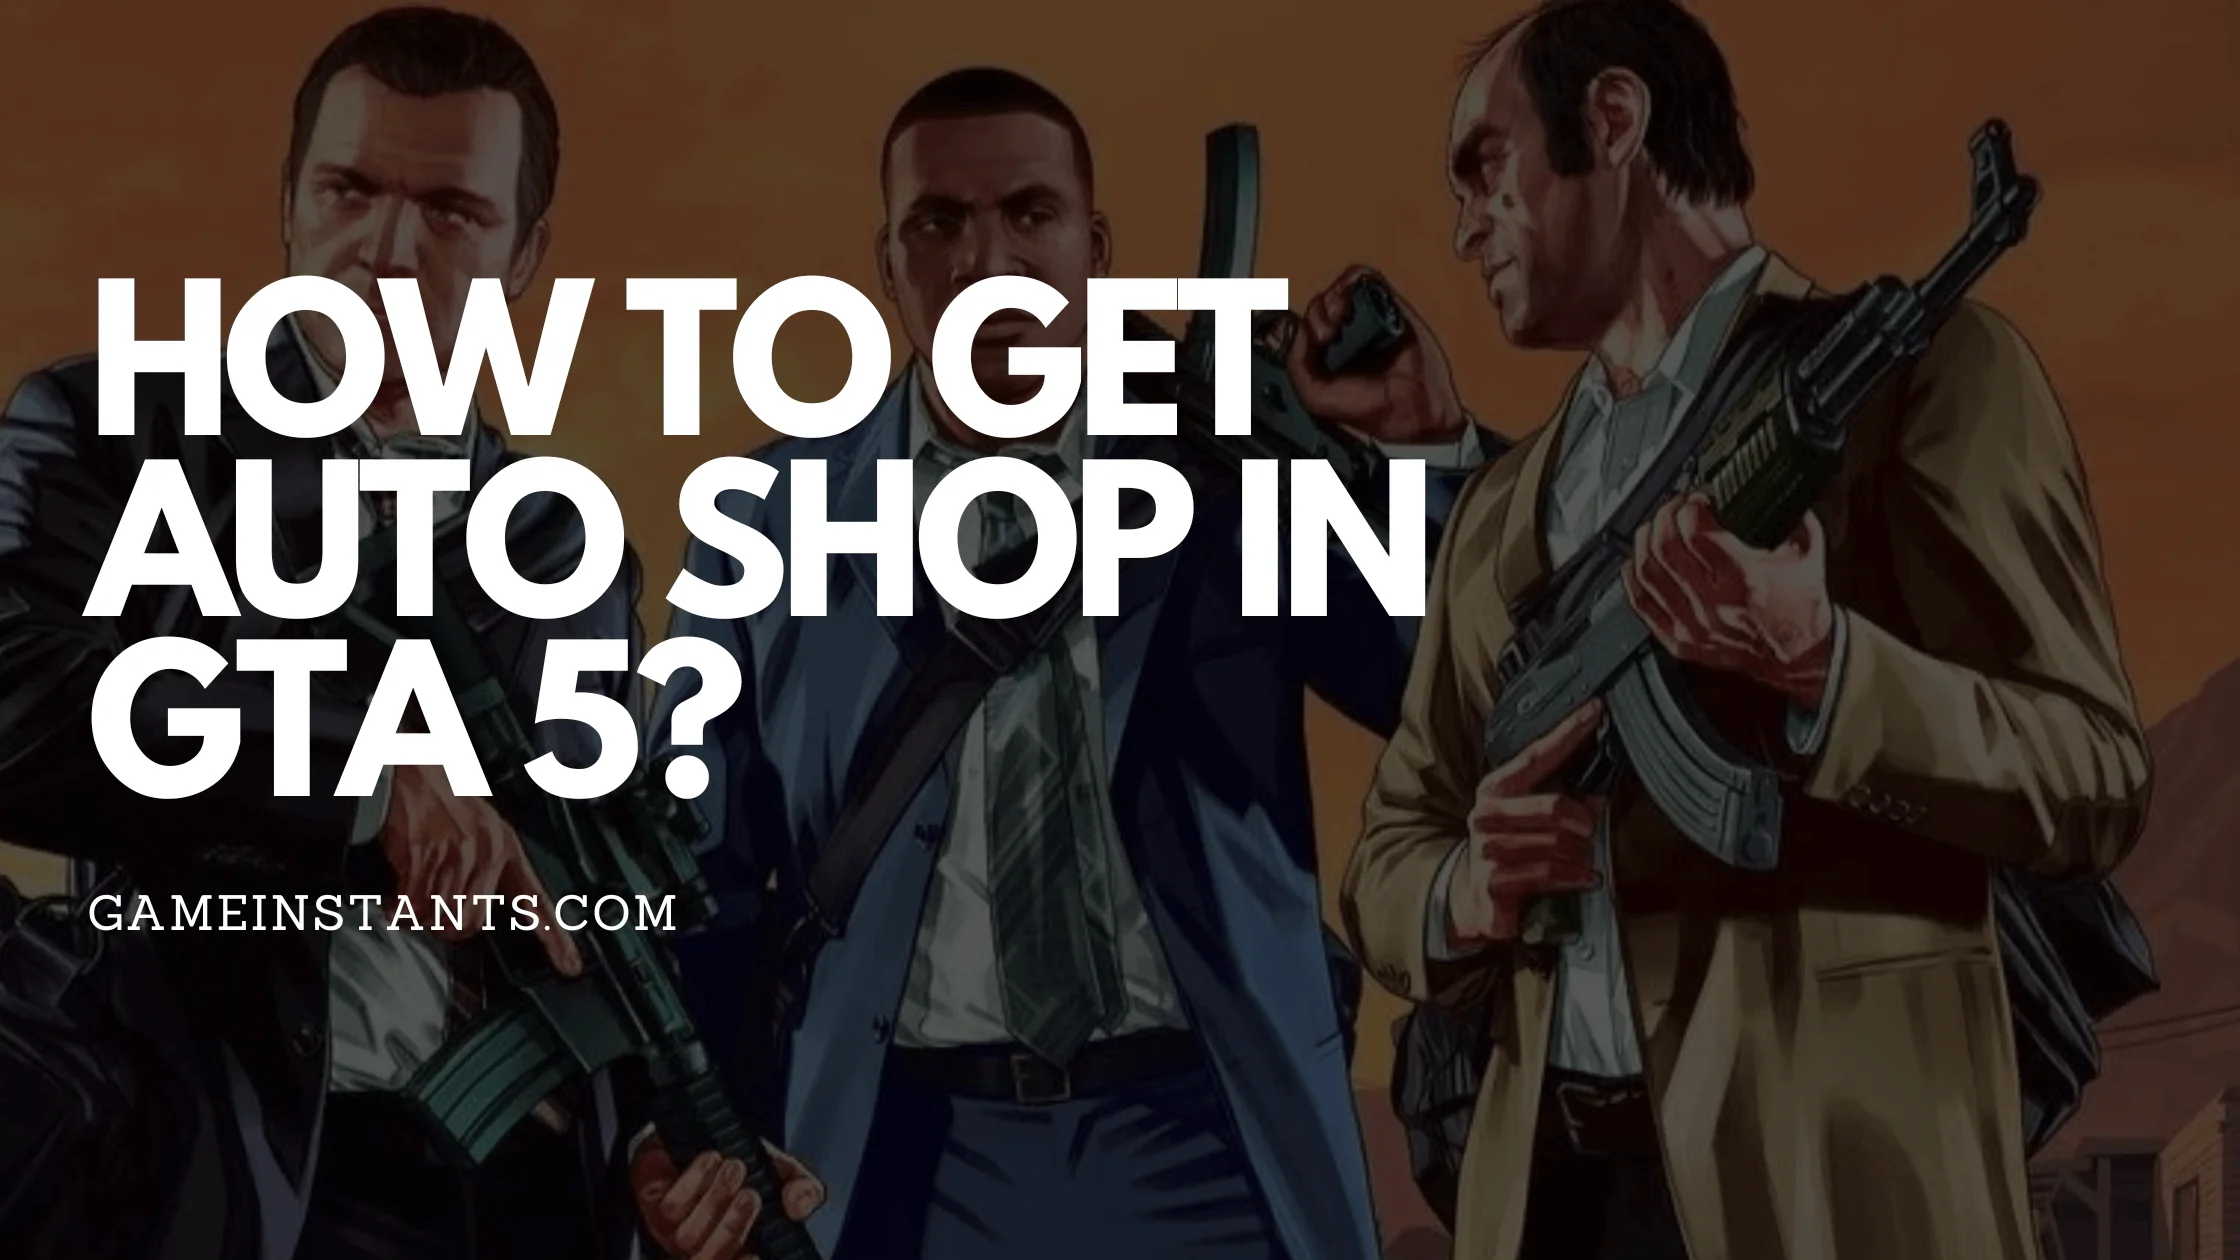 How To Get Auto Shop in GTA 5